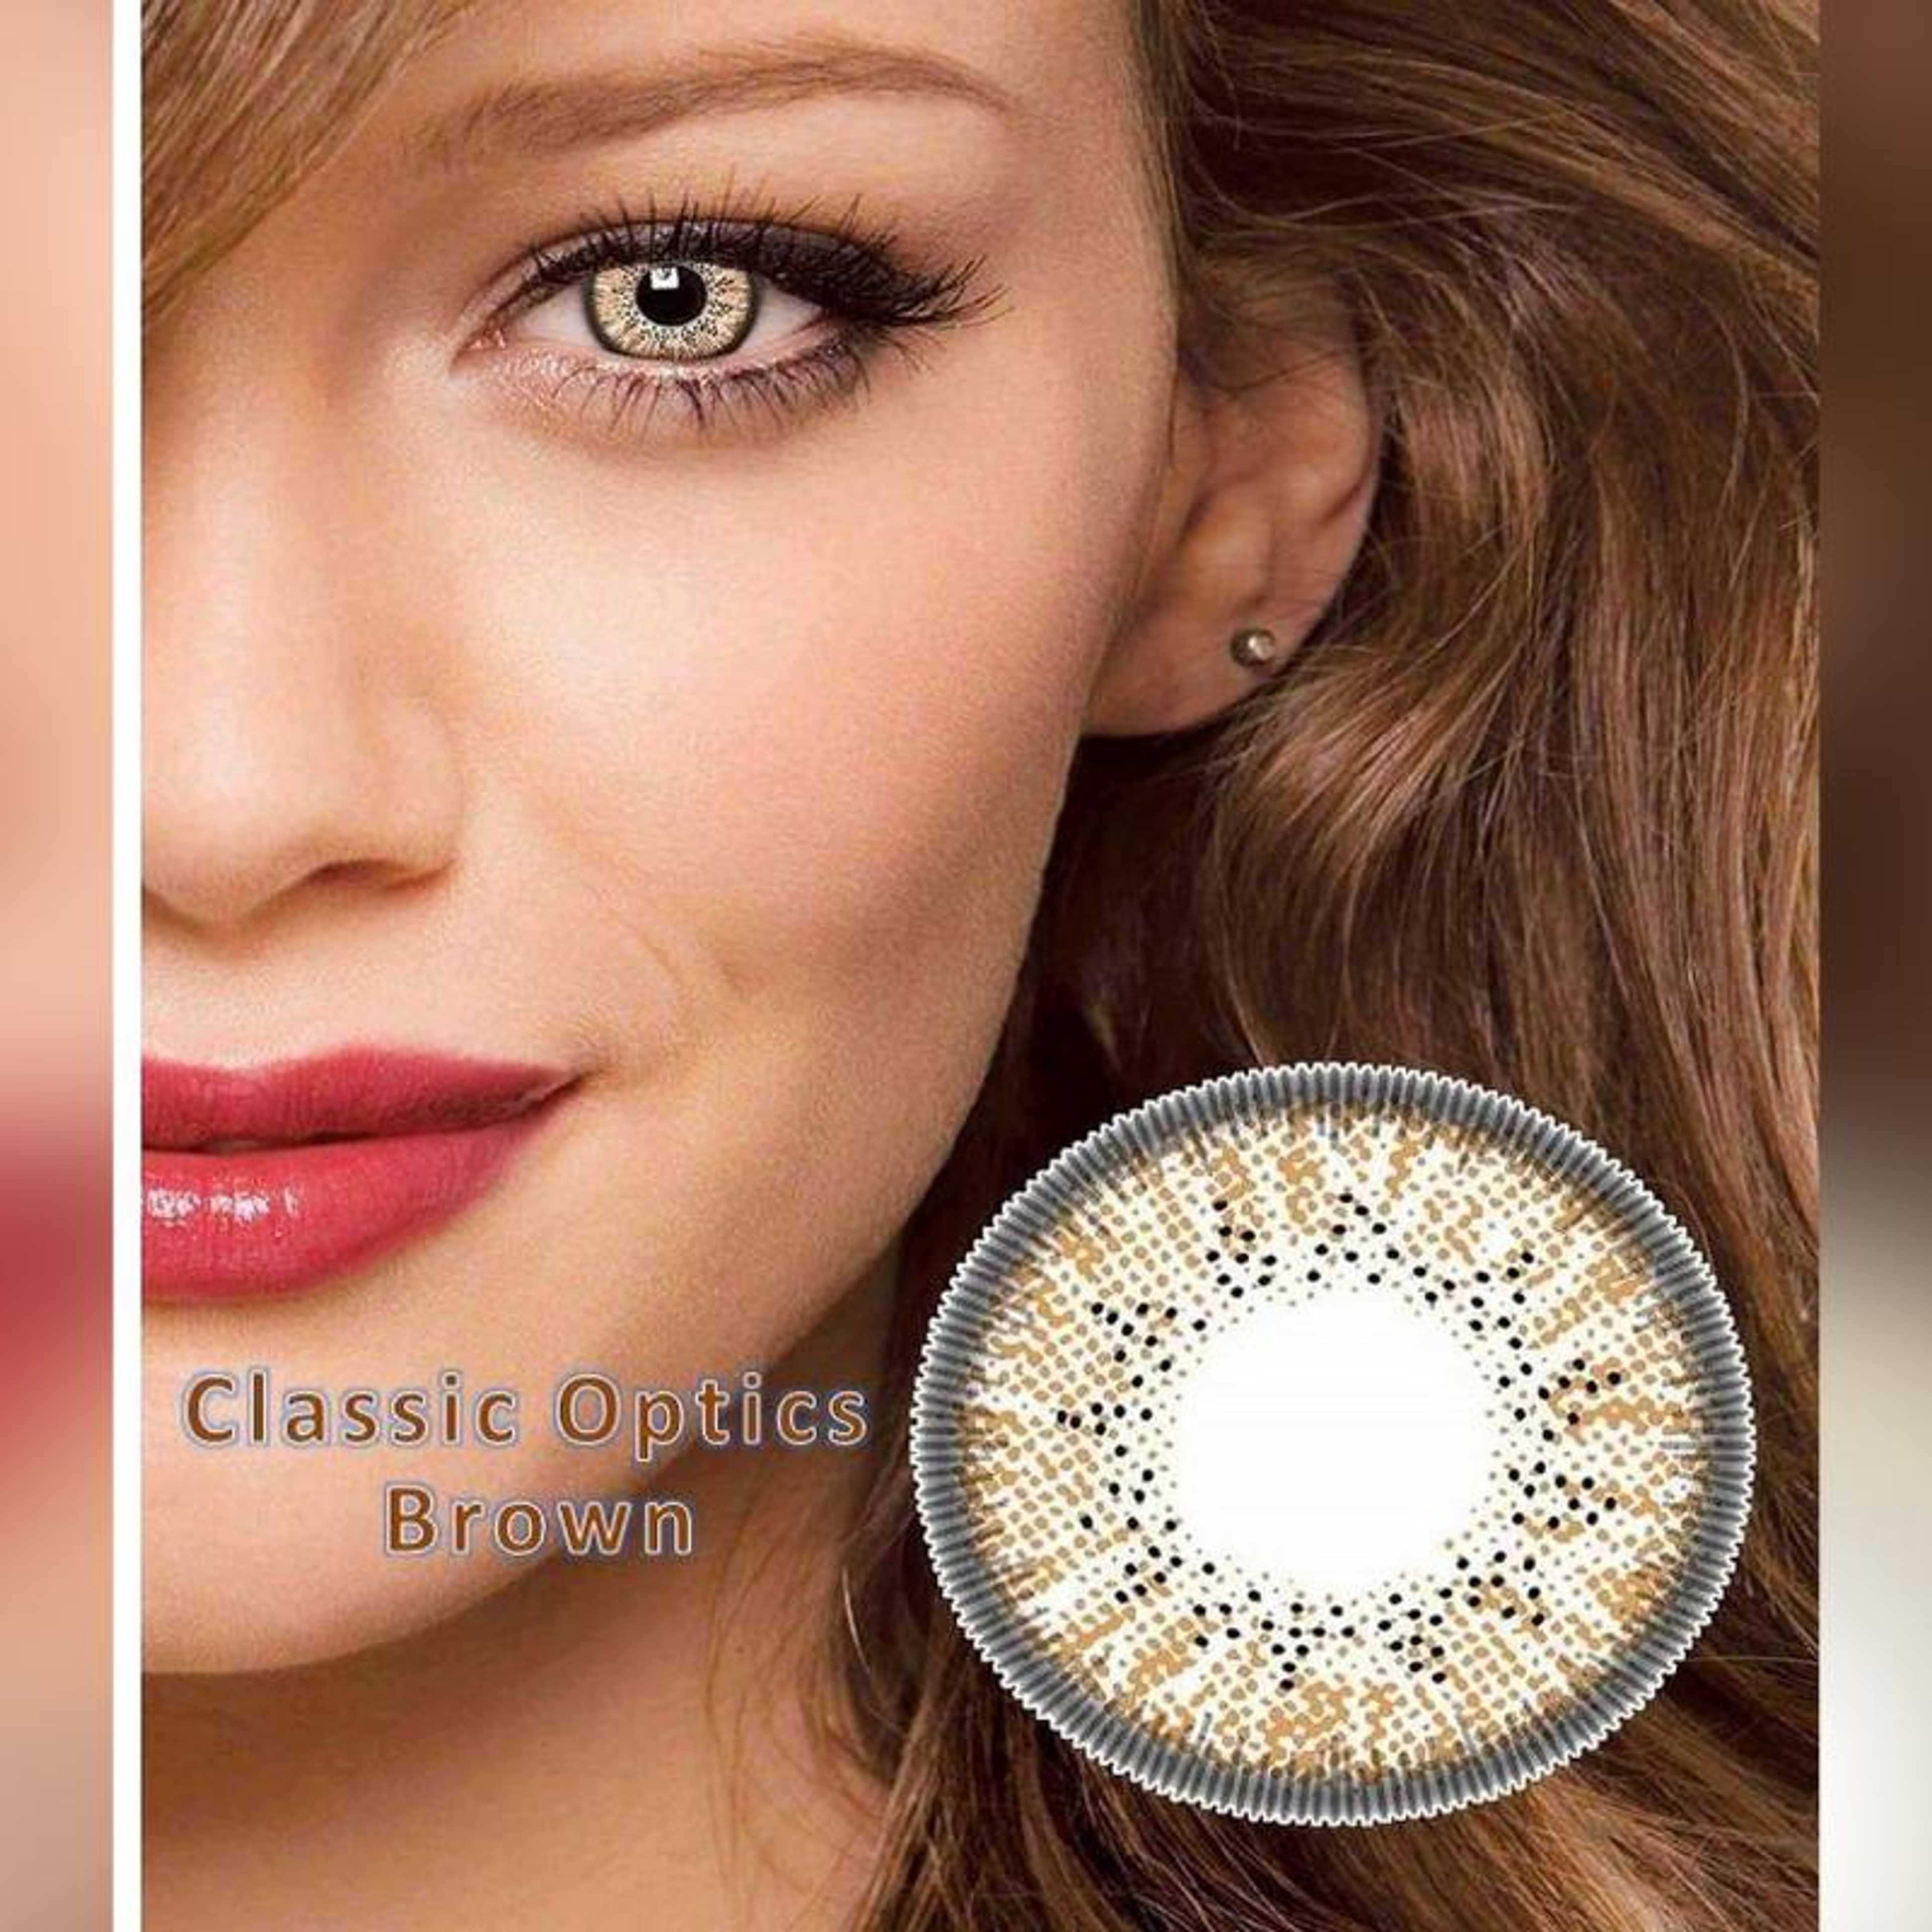 Brown Double shade Contact Lenses-Bridal Colors